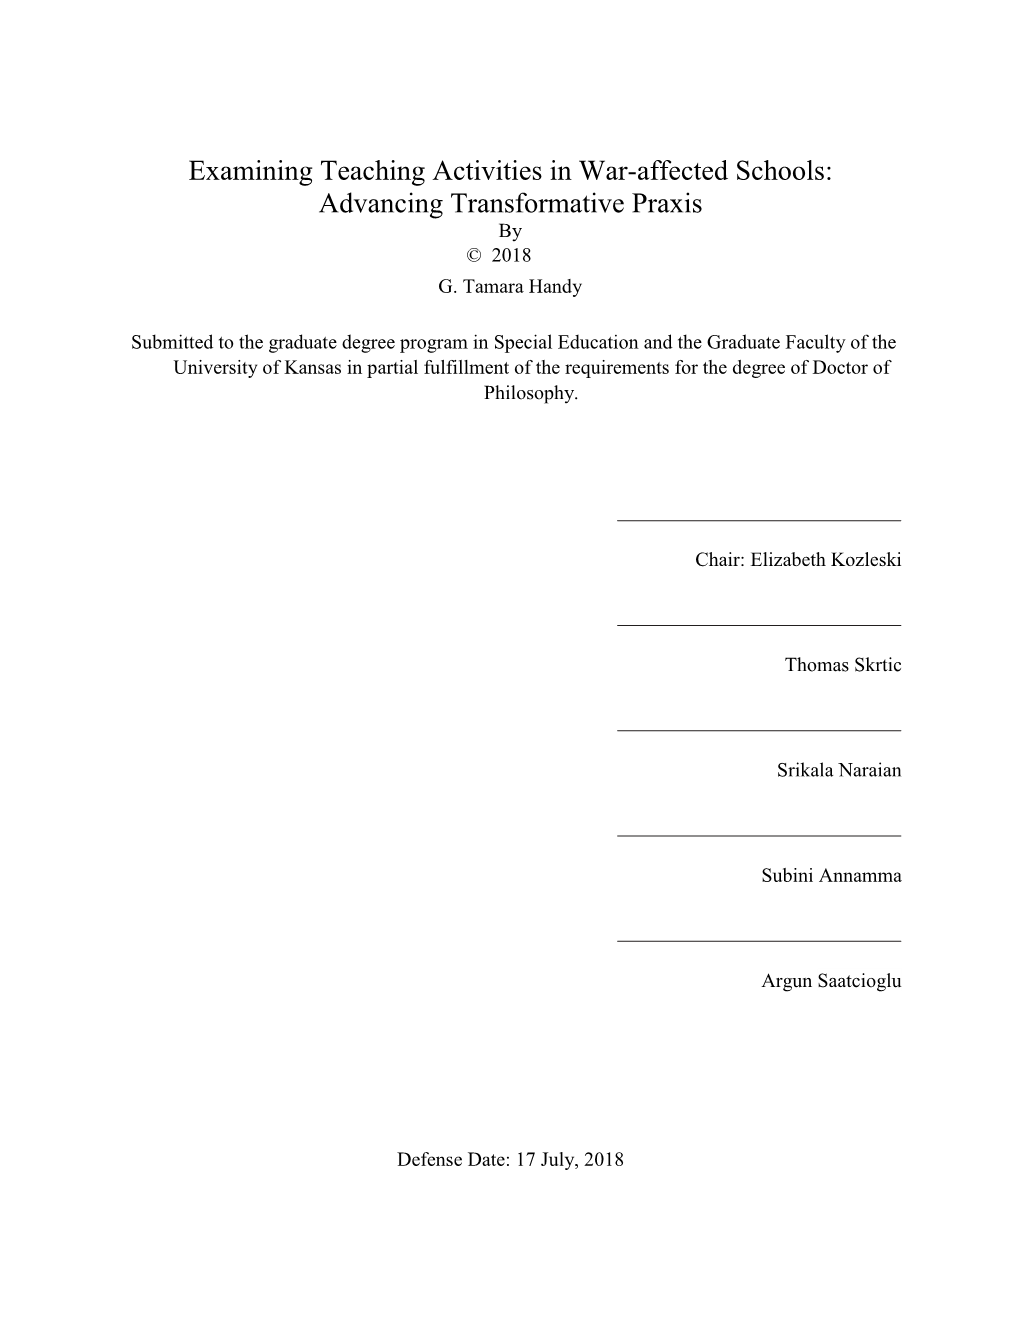 Examining Teaching Activities in War-Affected Schools: Advancing Transformative Praxis by © 2018 G